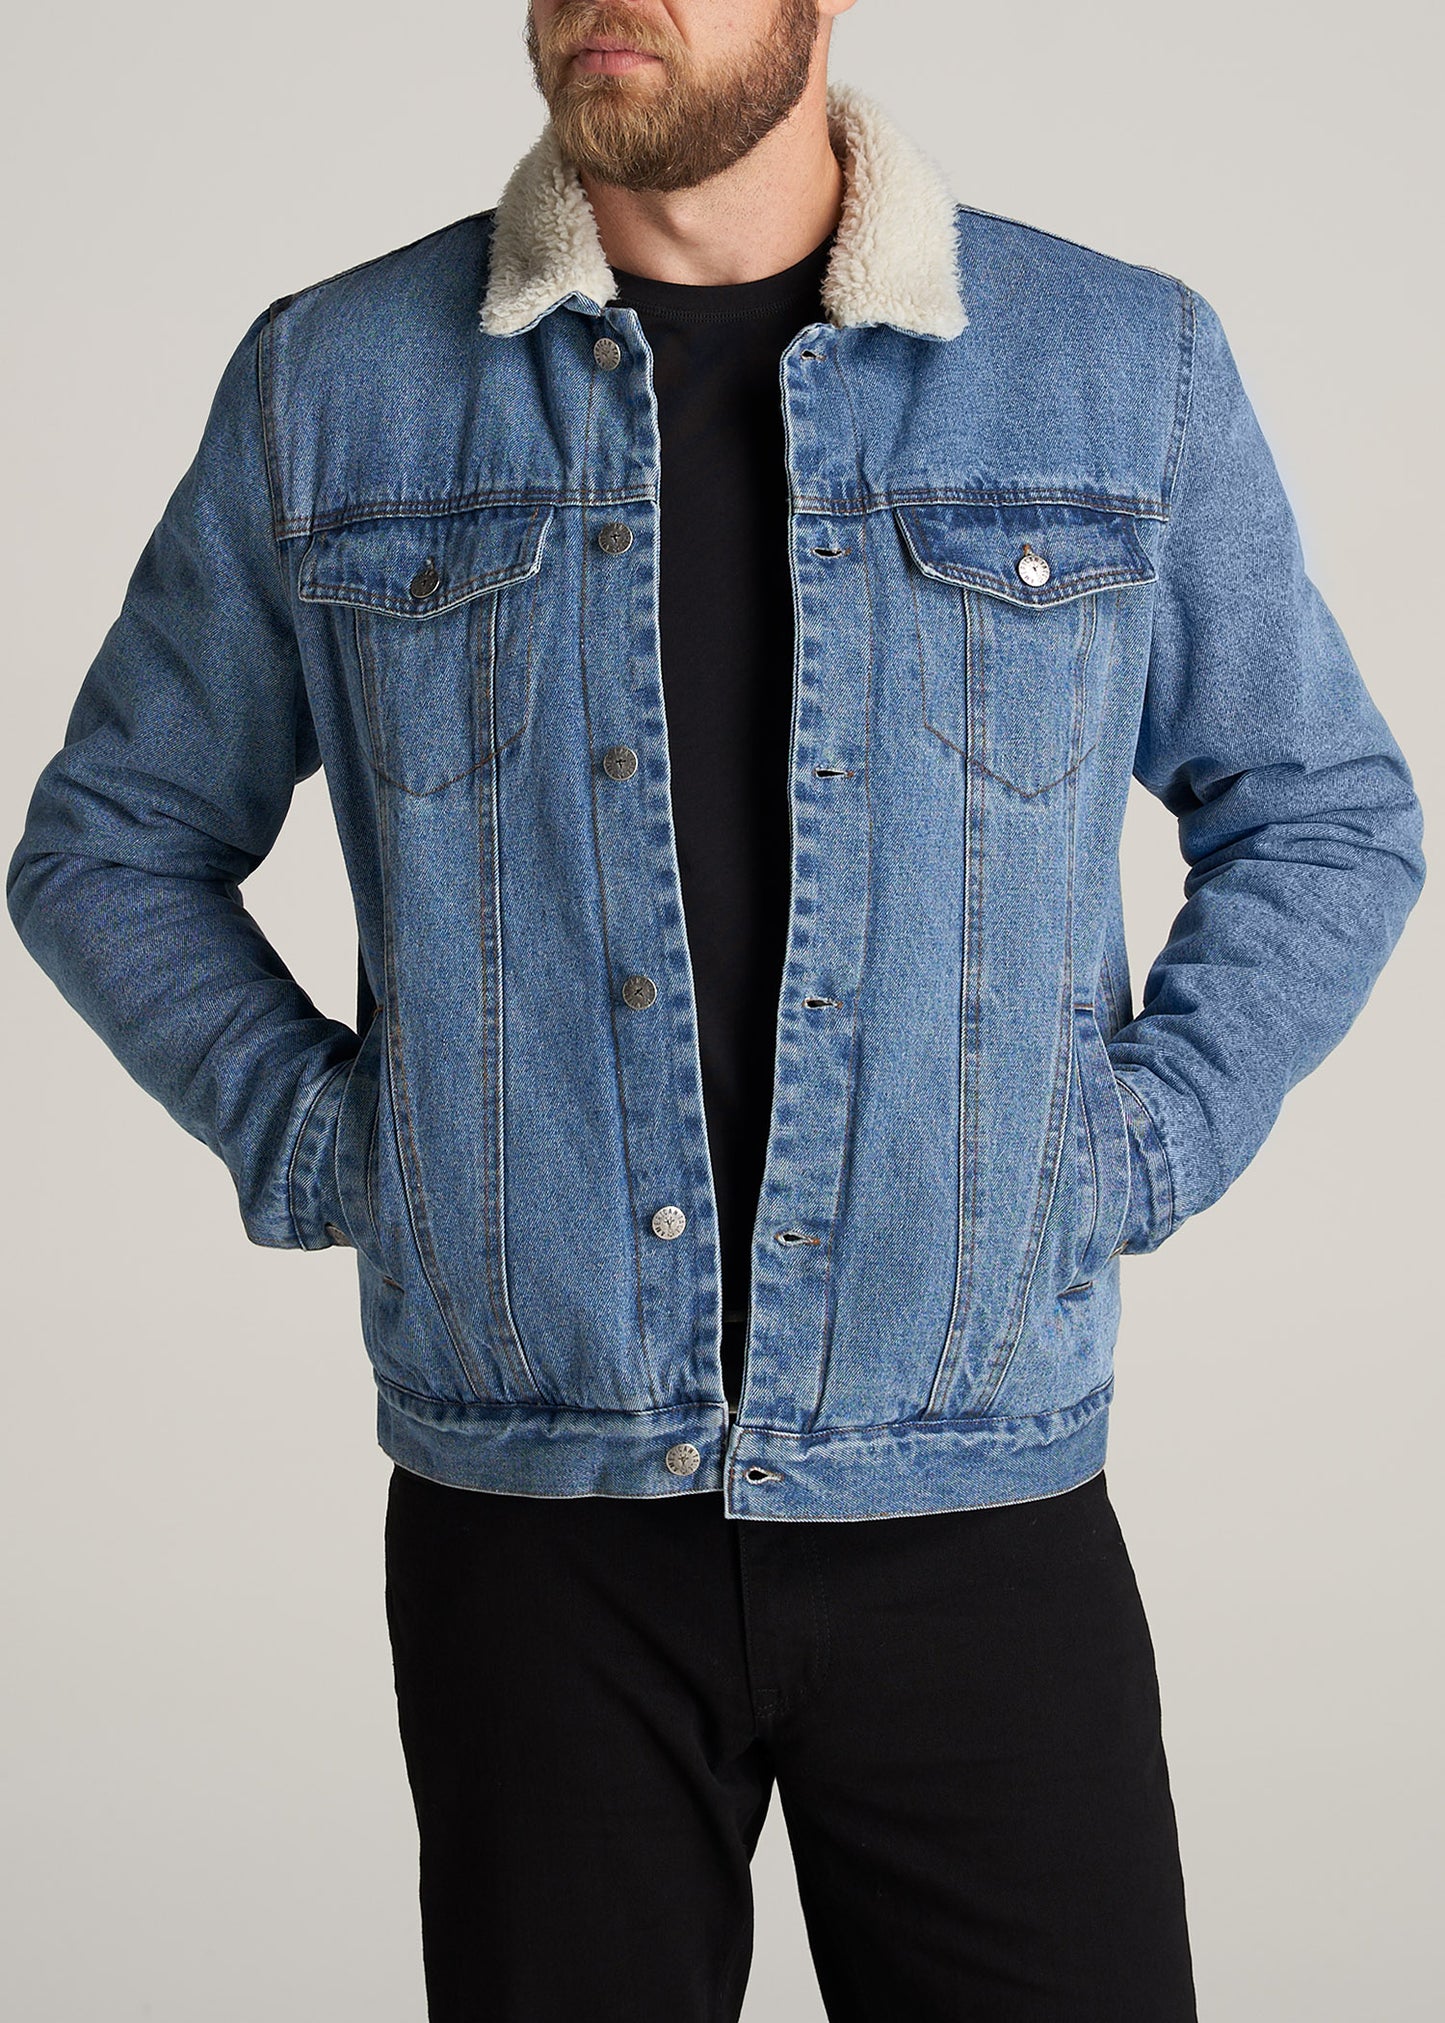 Mens Denim Hooded Jeans Jacket And Jeans Coat For Men Casual Sportswear For  Outdoors, Cowboy Style, Plus Size Available 201116 From Mu03, $33.33 |  DHgate.Com